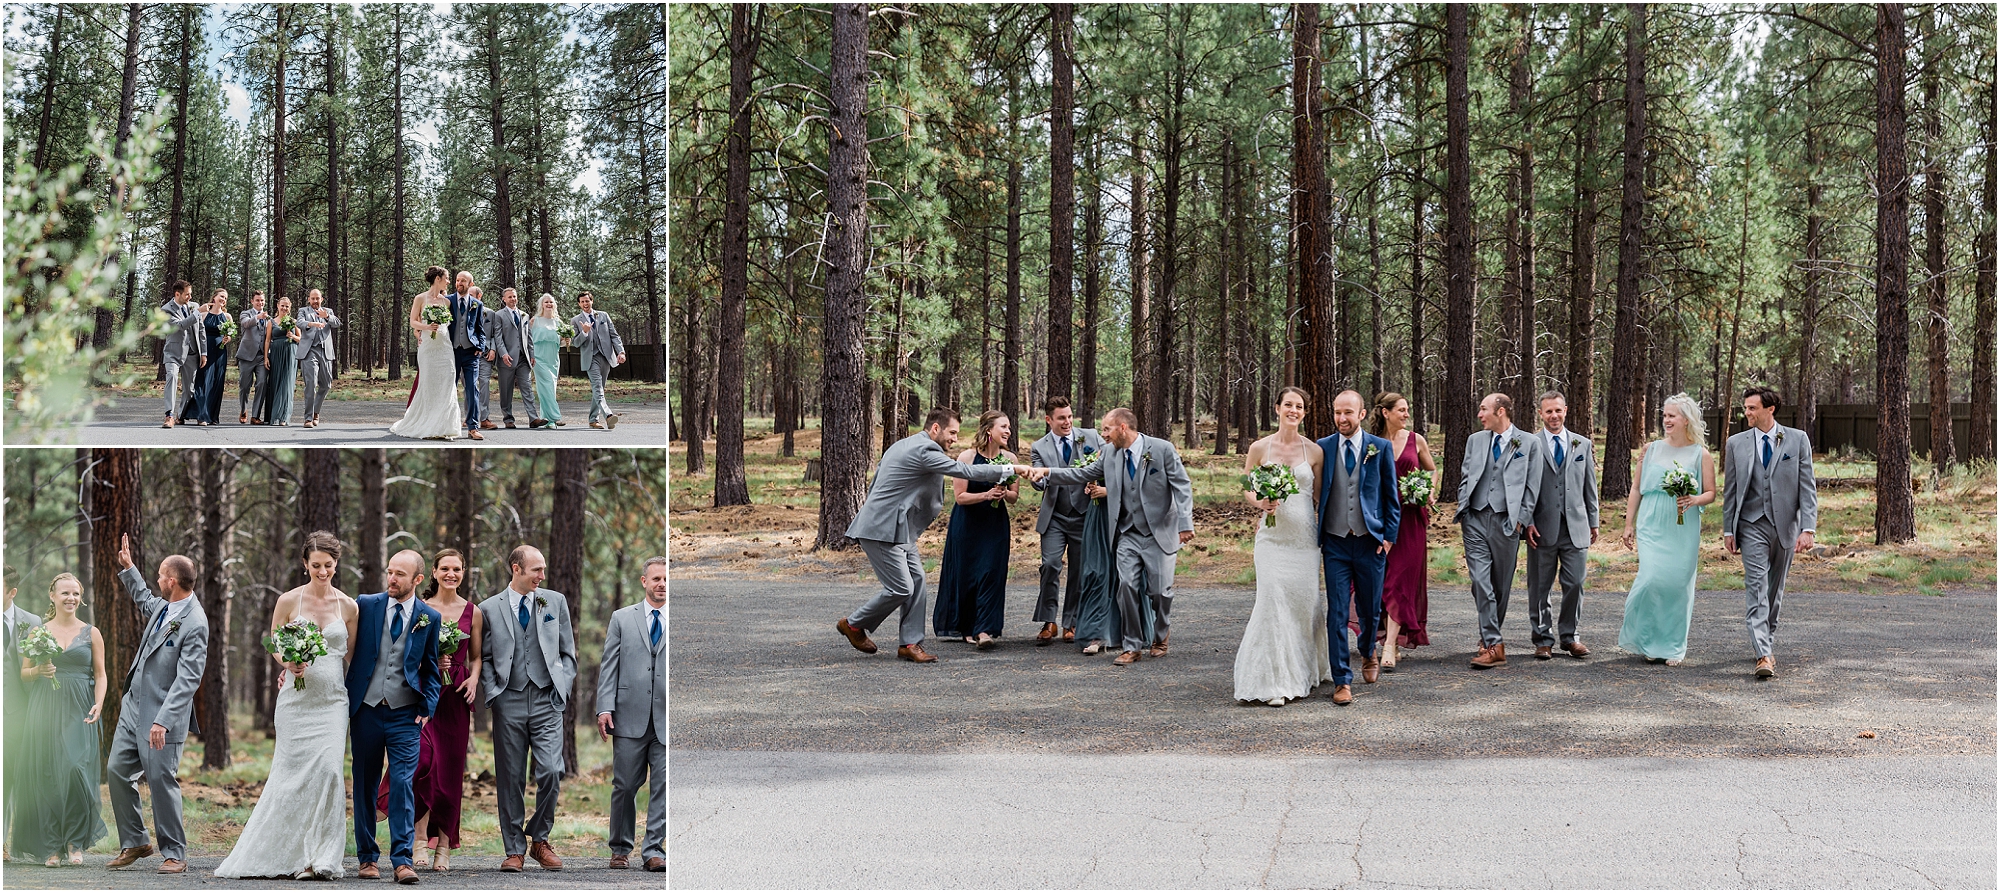 The large wedding party has some fun together during their portraits at this High Desert Museum homestead wedding near Bend, Oregon. | ERica Swantek Photography